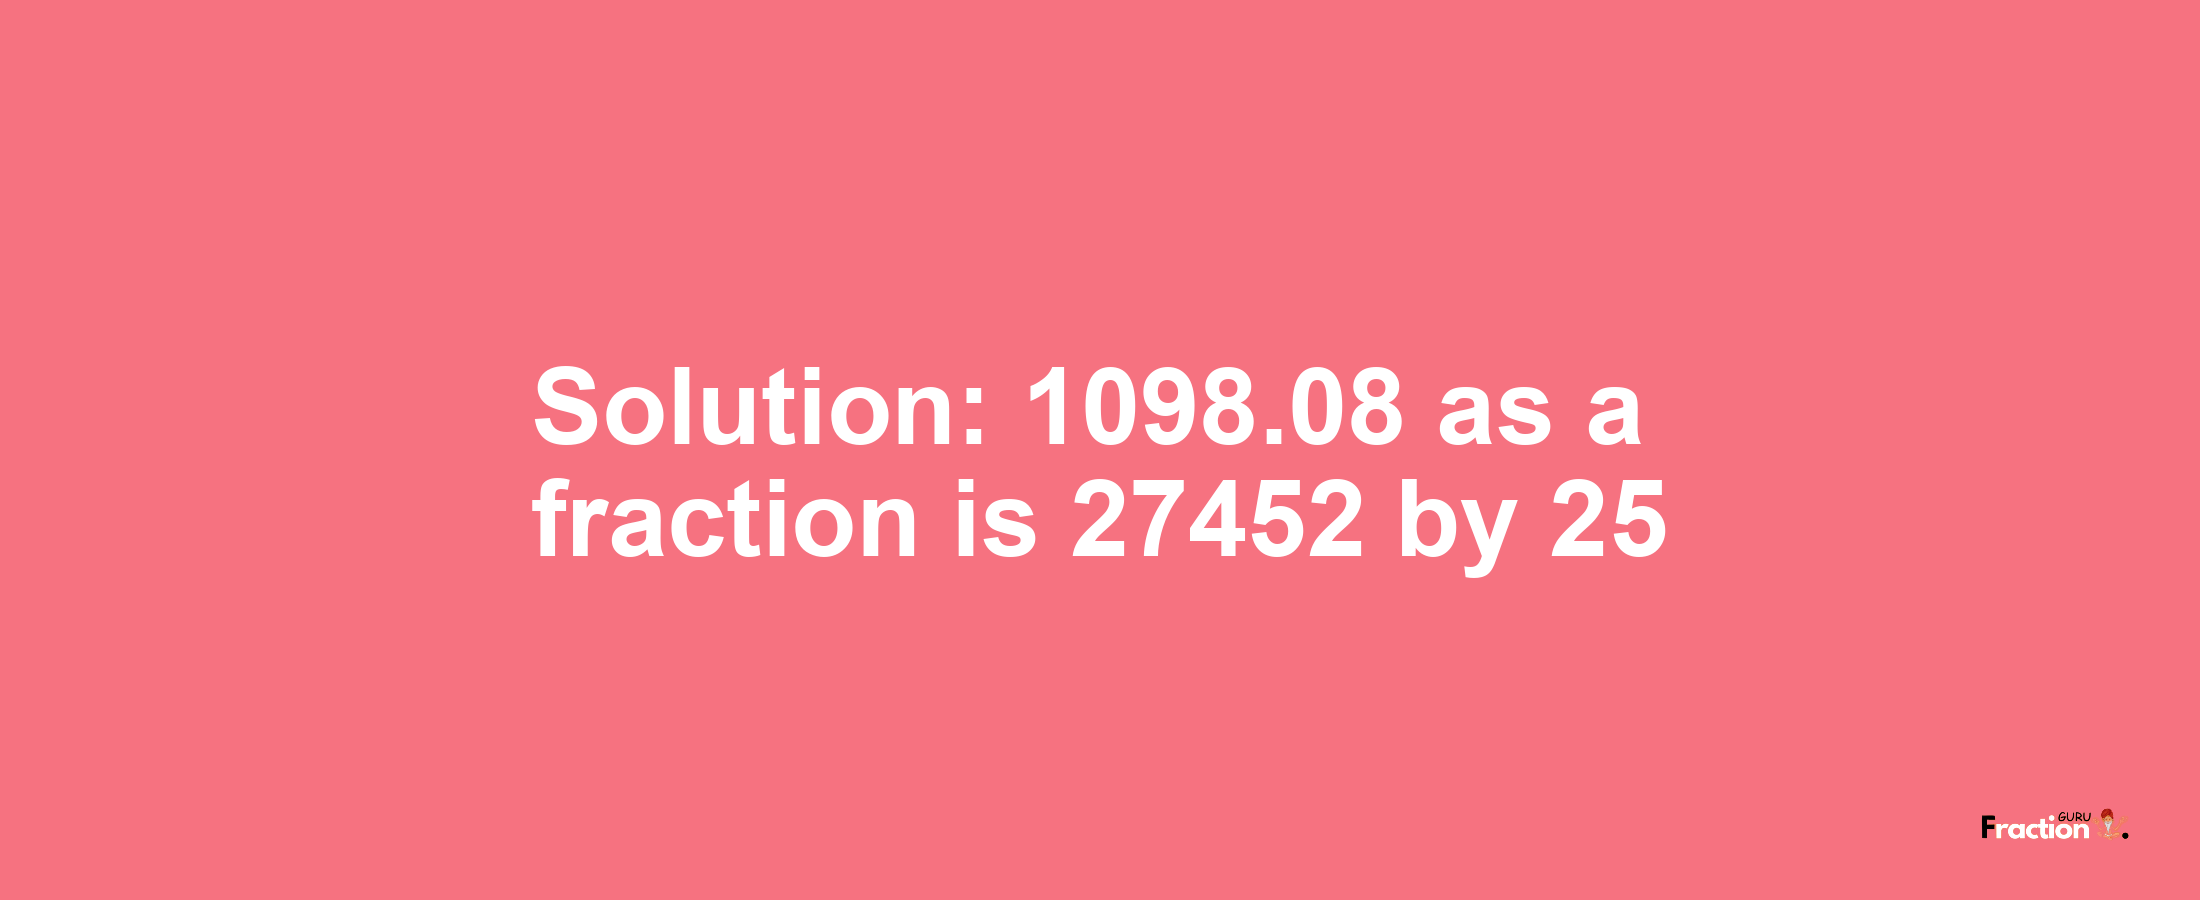 Solution:1098.08 as a fraction is 27452/25